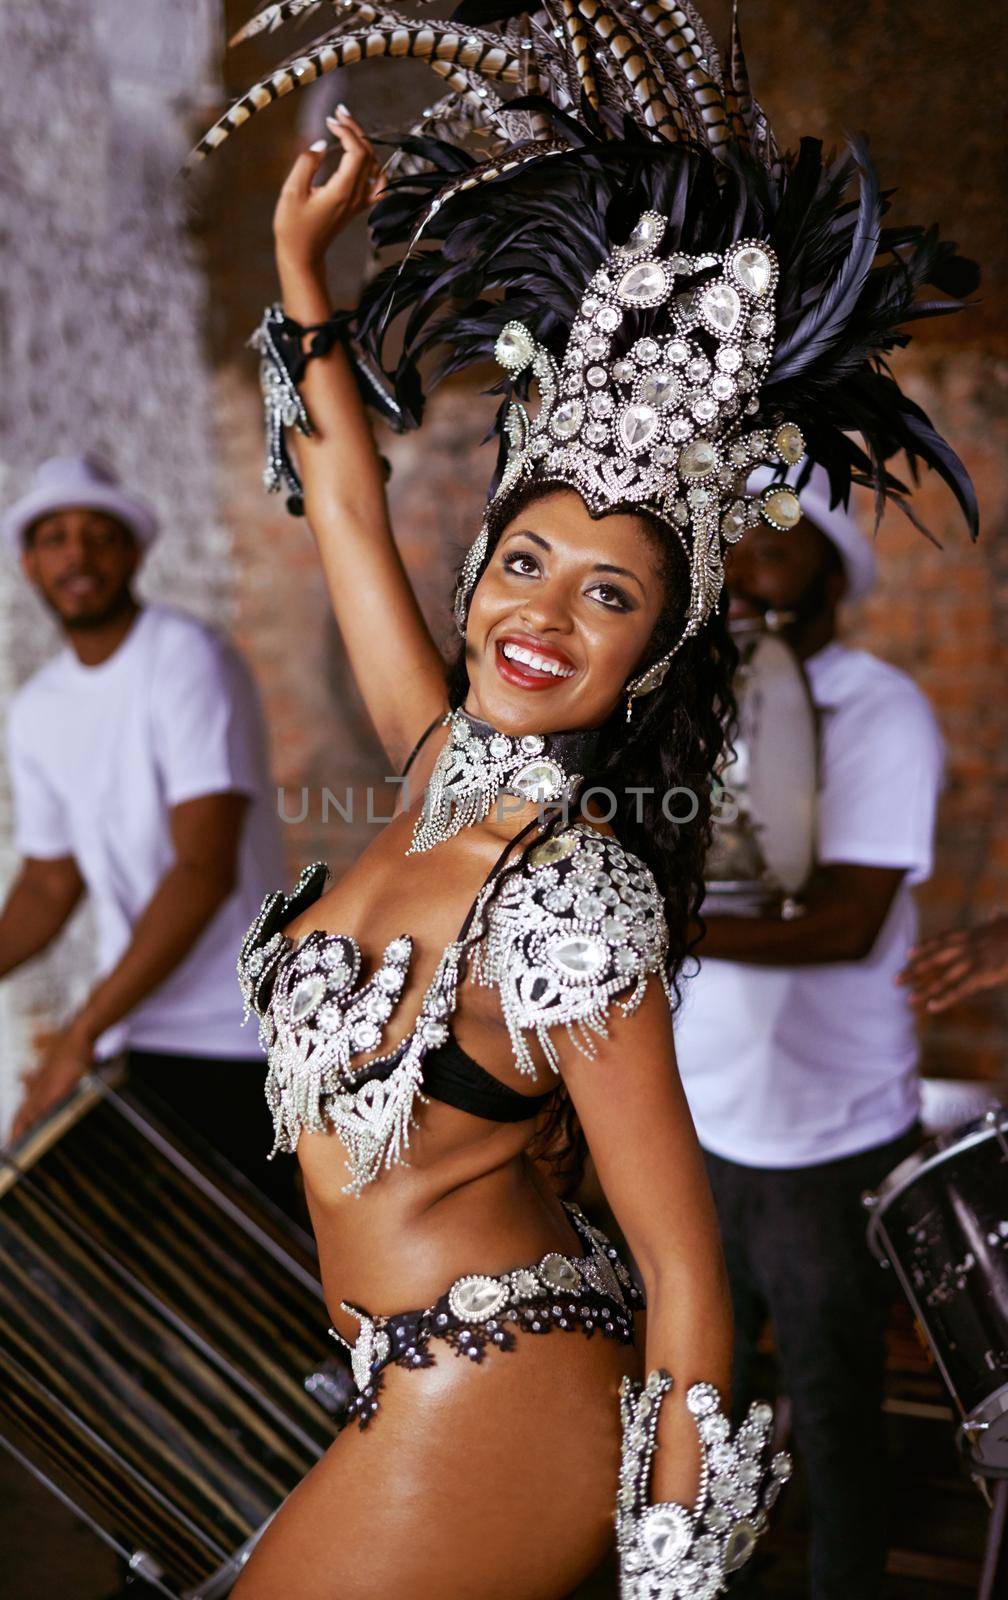 Shes got flare. an attractive ethnic female in a beaded costume dancing the samba with her band members. by YuriArcurs